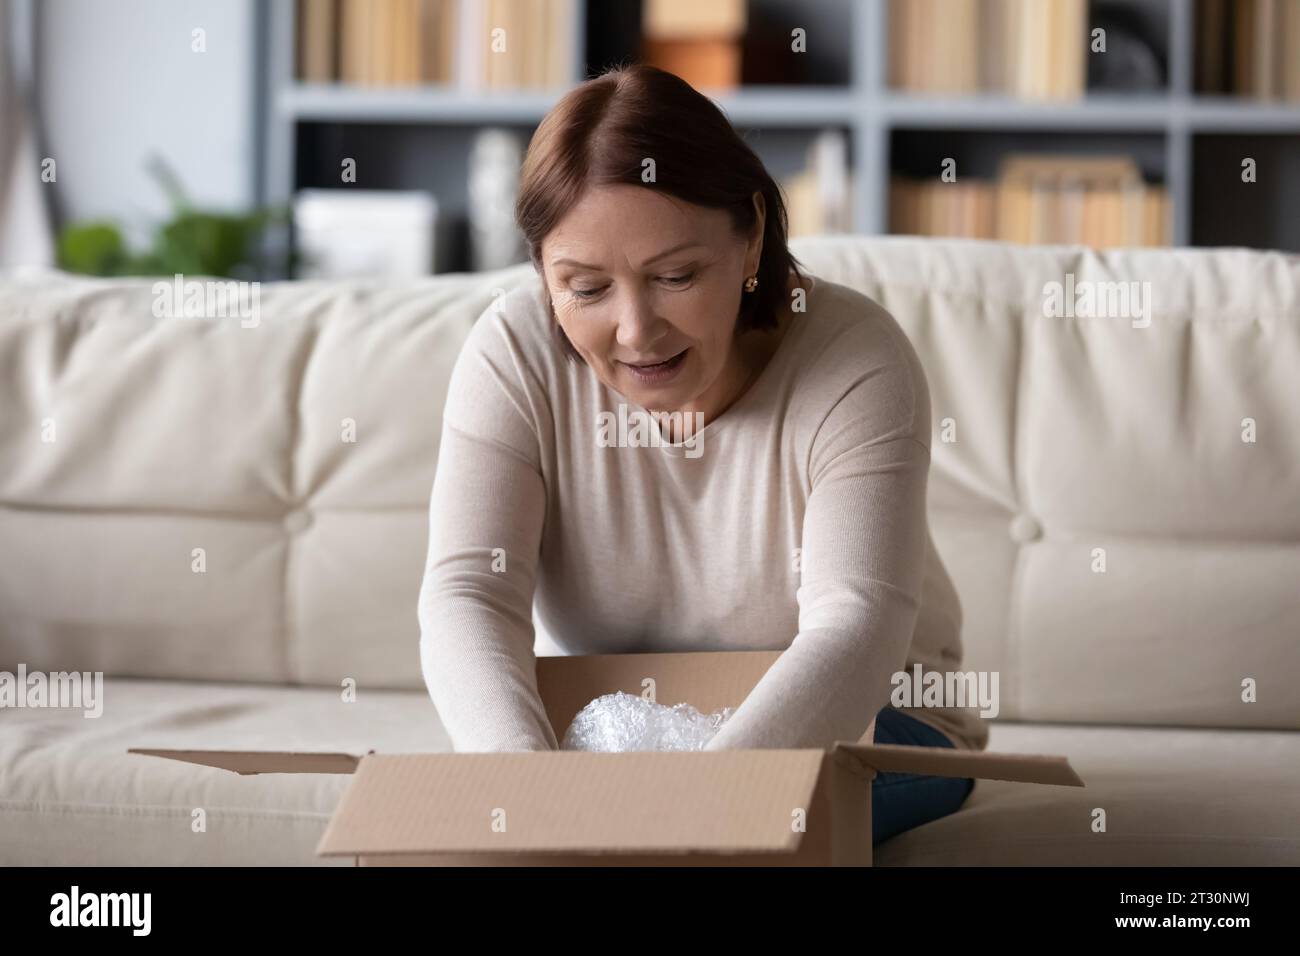 60s woman received parcel enjoy moment of opening box Stock Photo